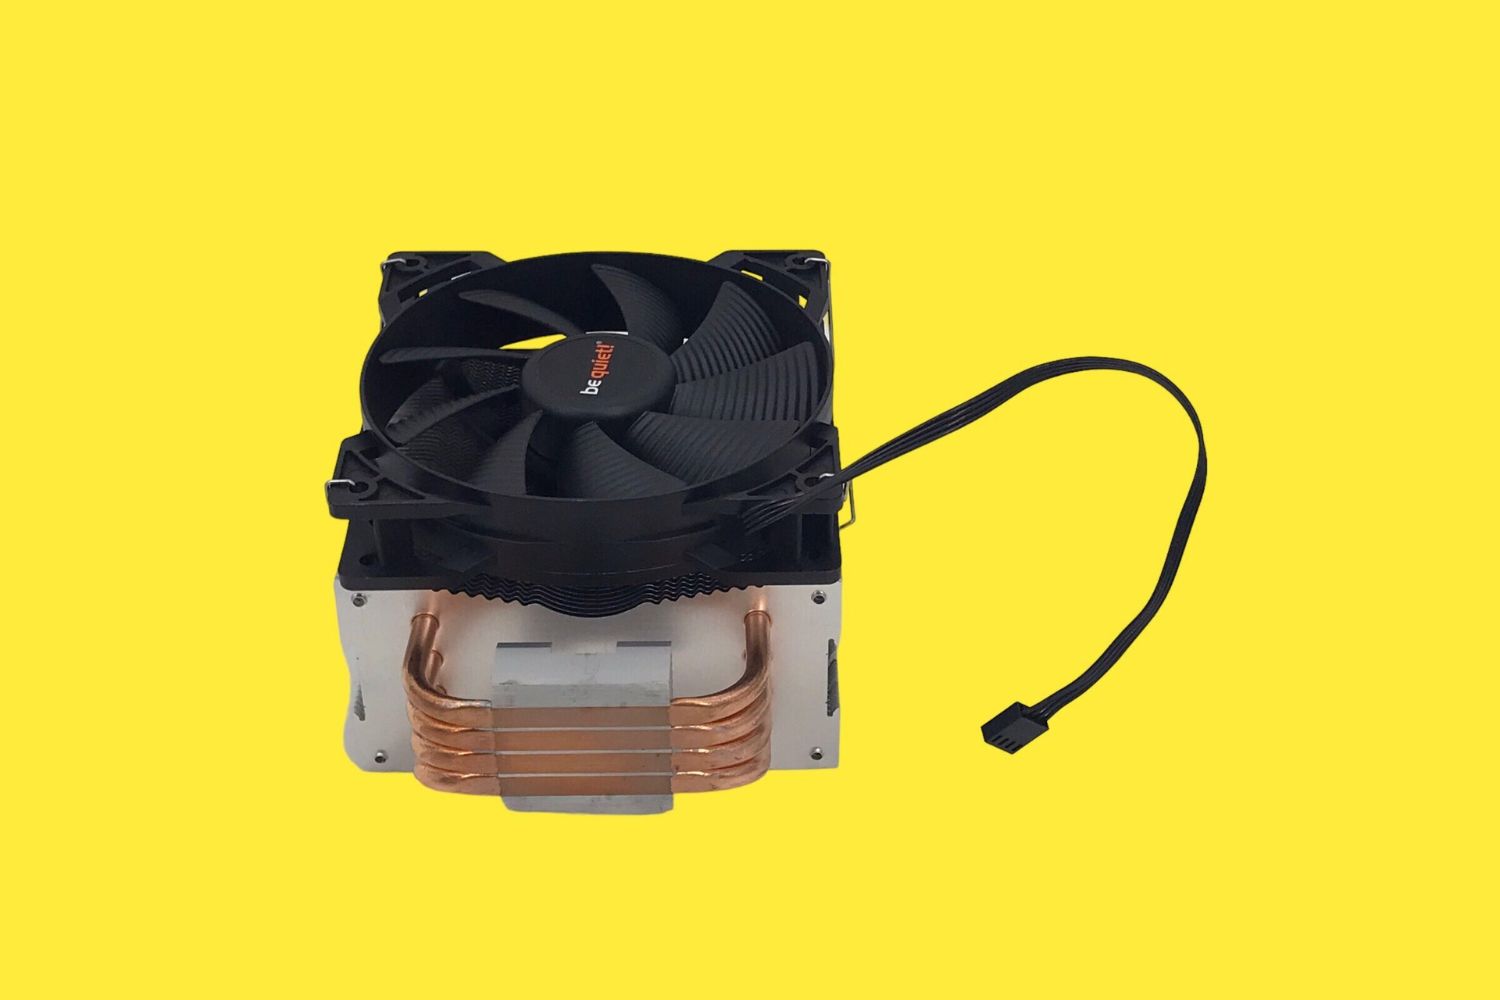 How To See The TDP Of CPU Cooler